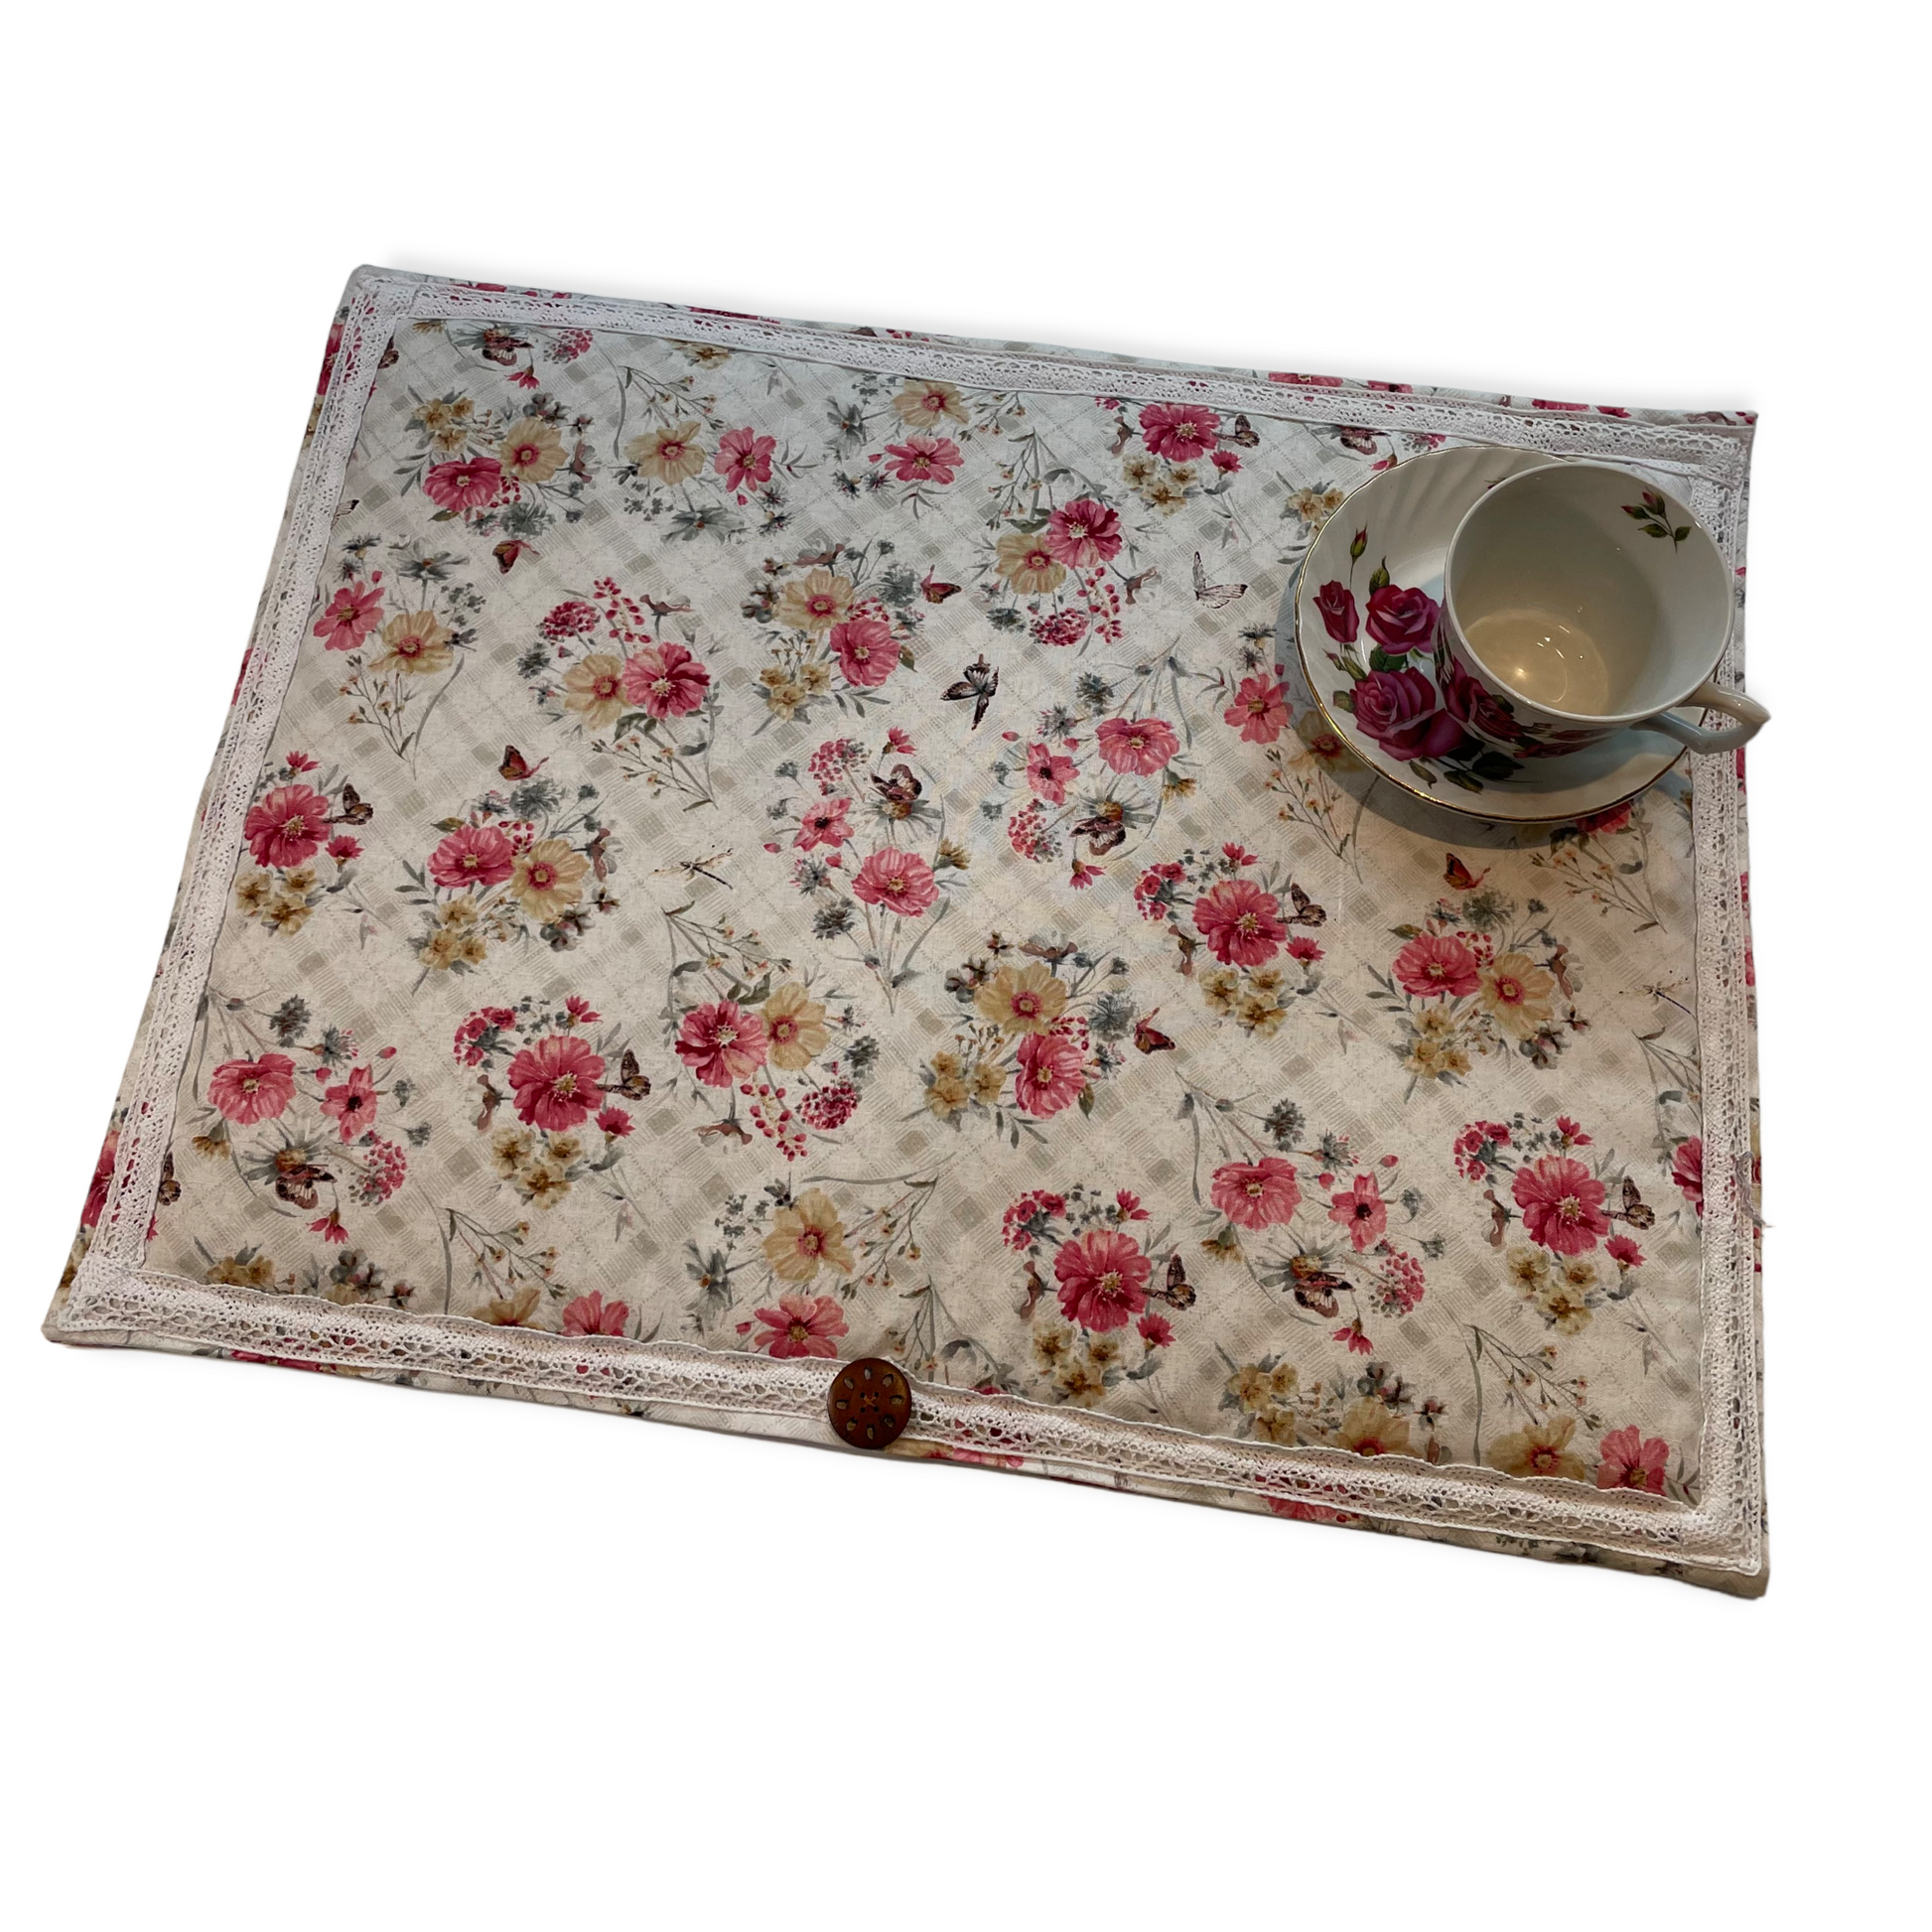 The Original Red Floral Dish Drying Mat